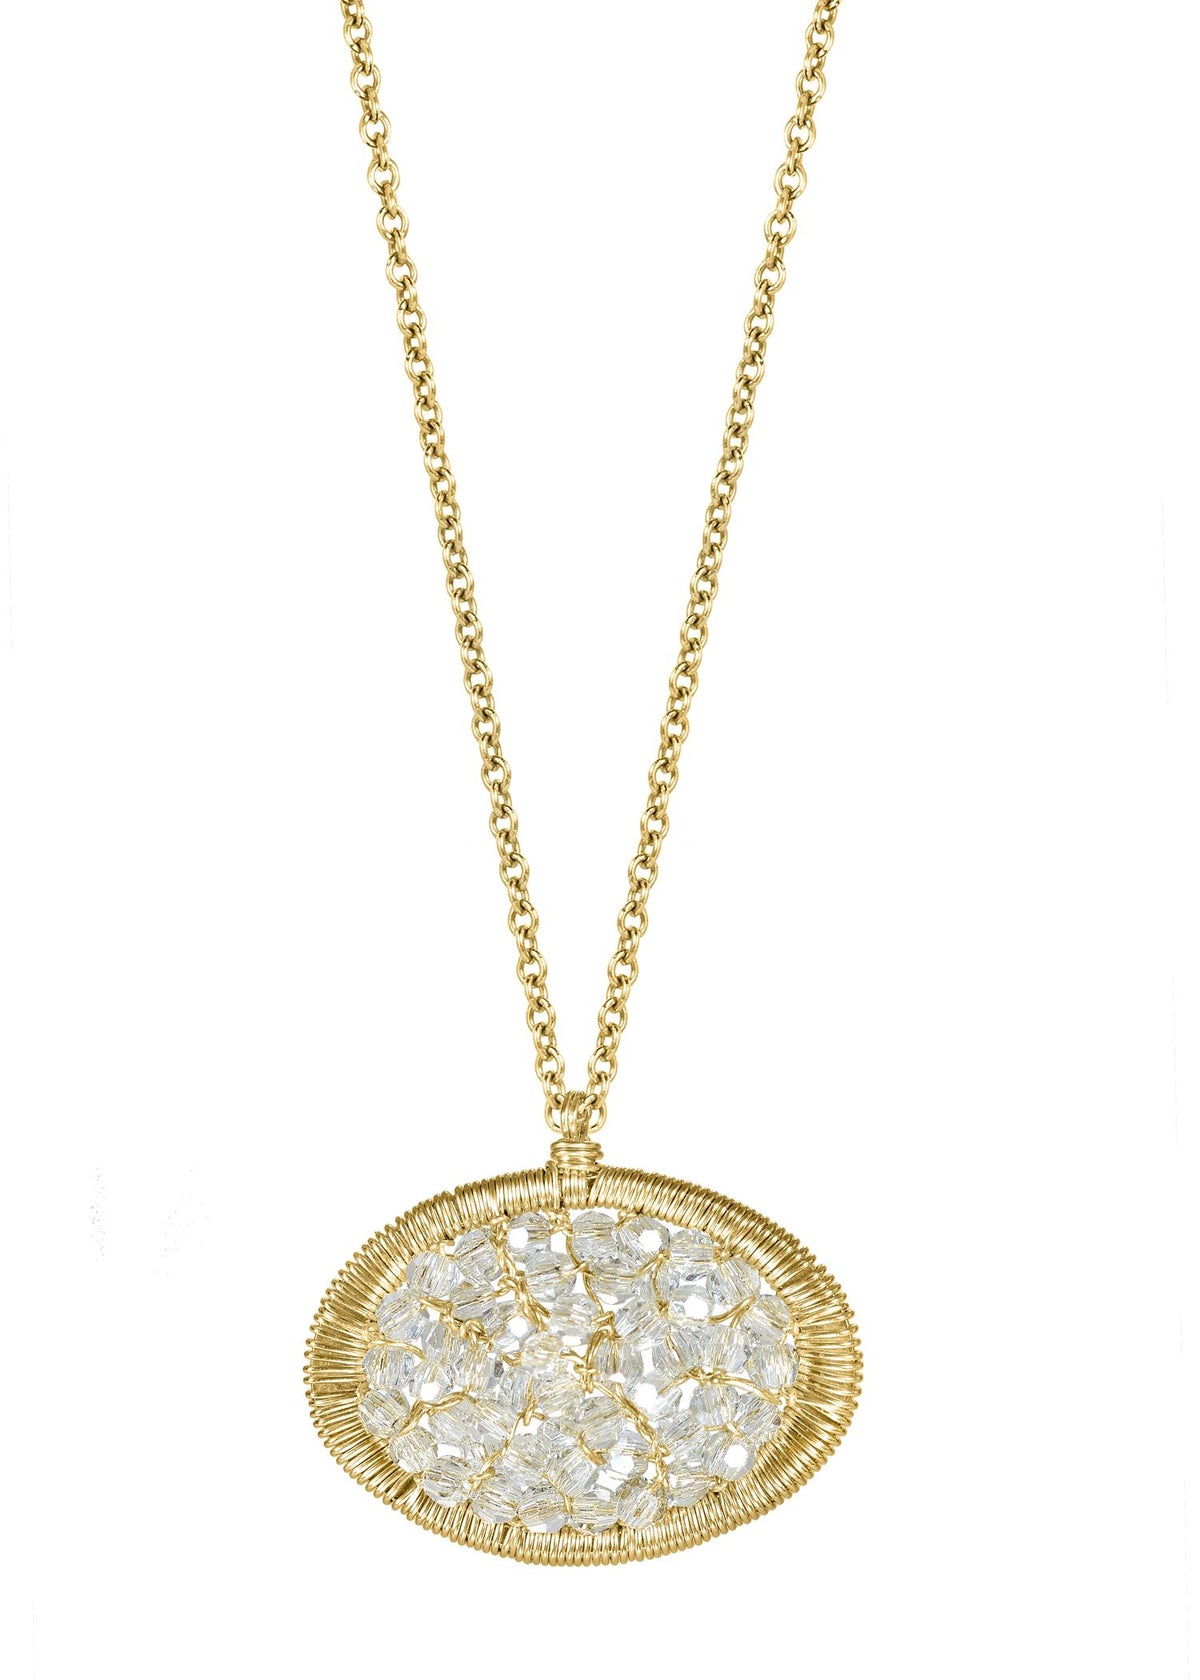 Crystal 14k gold fill Necklace measures 16” in length Pendant measures 9/16” in length and 3/4” in width Handmade in our Los Angeles studio